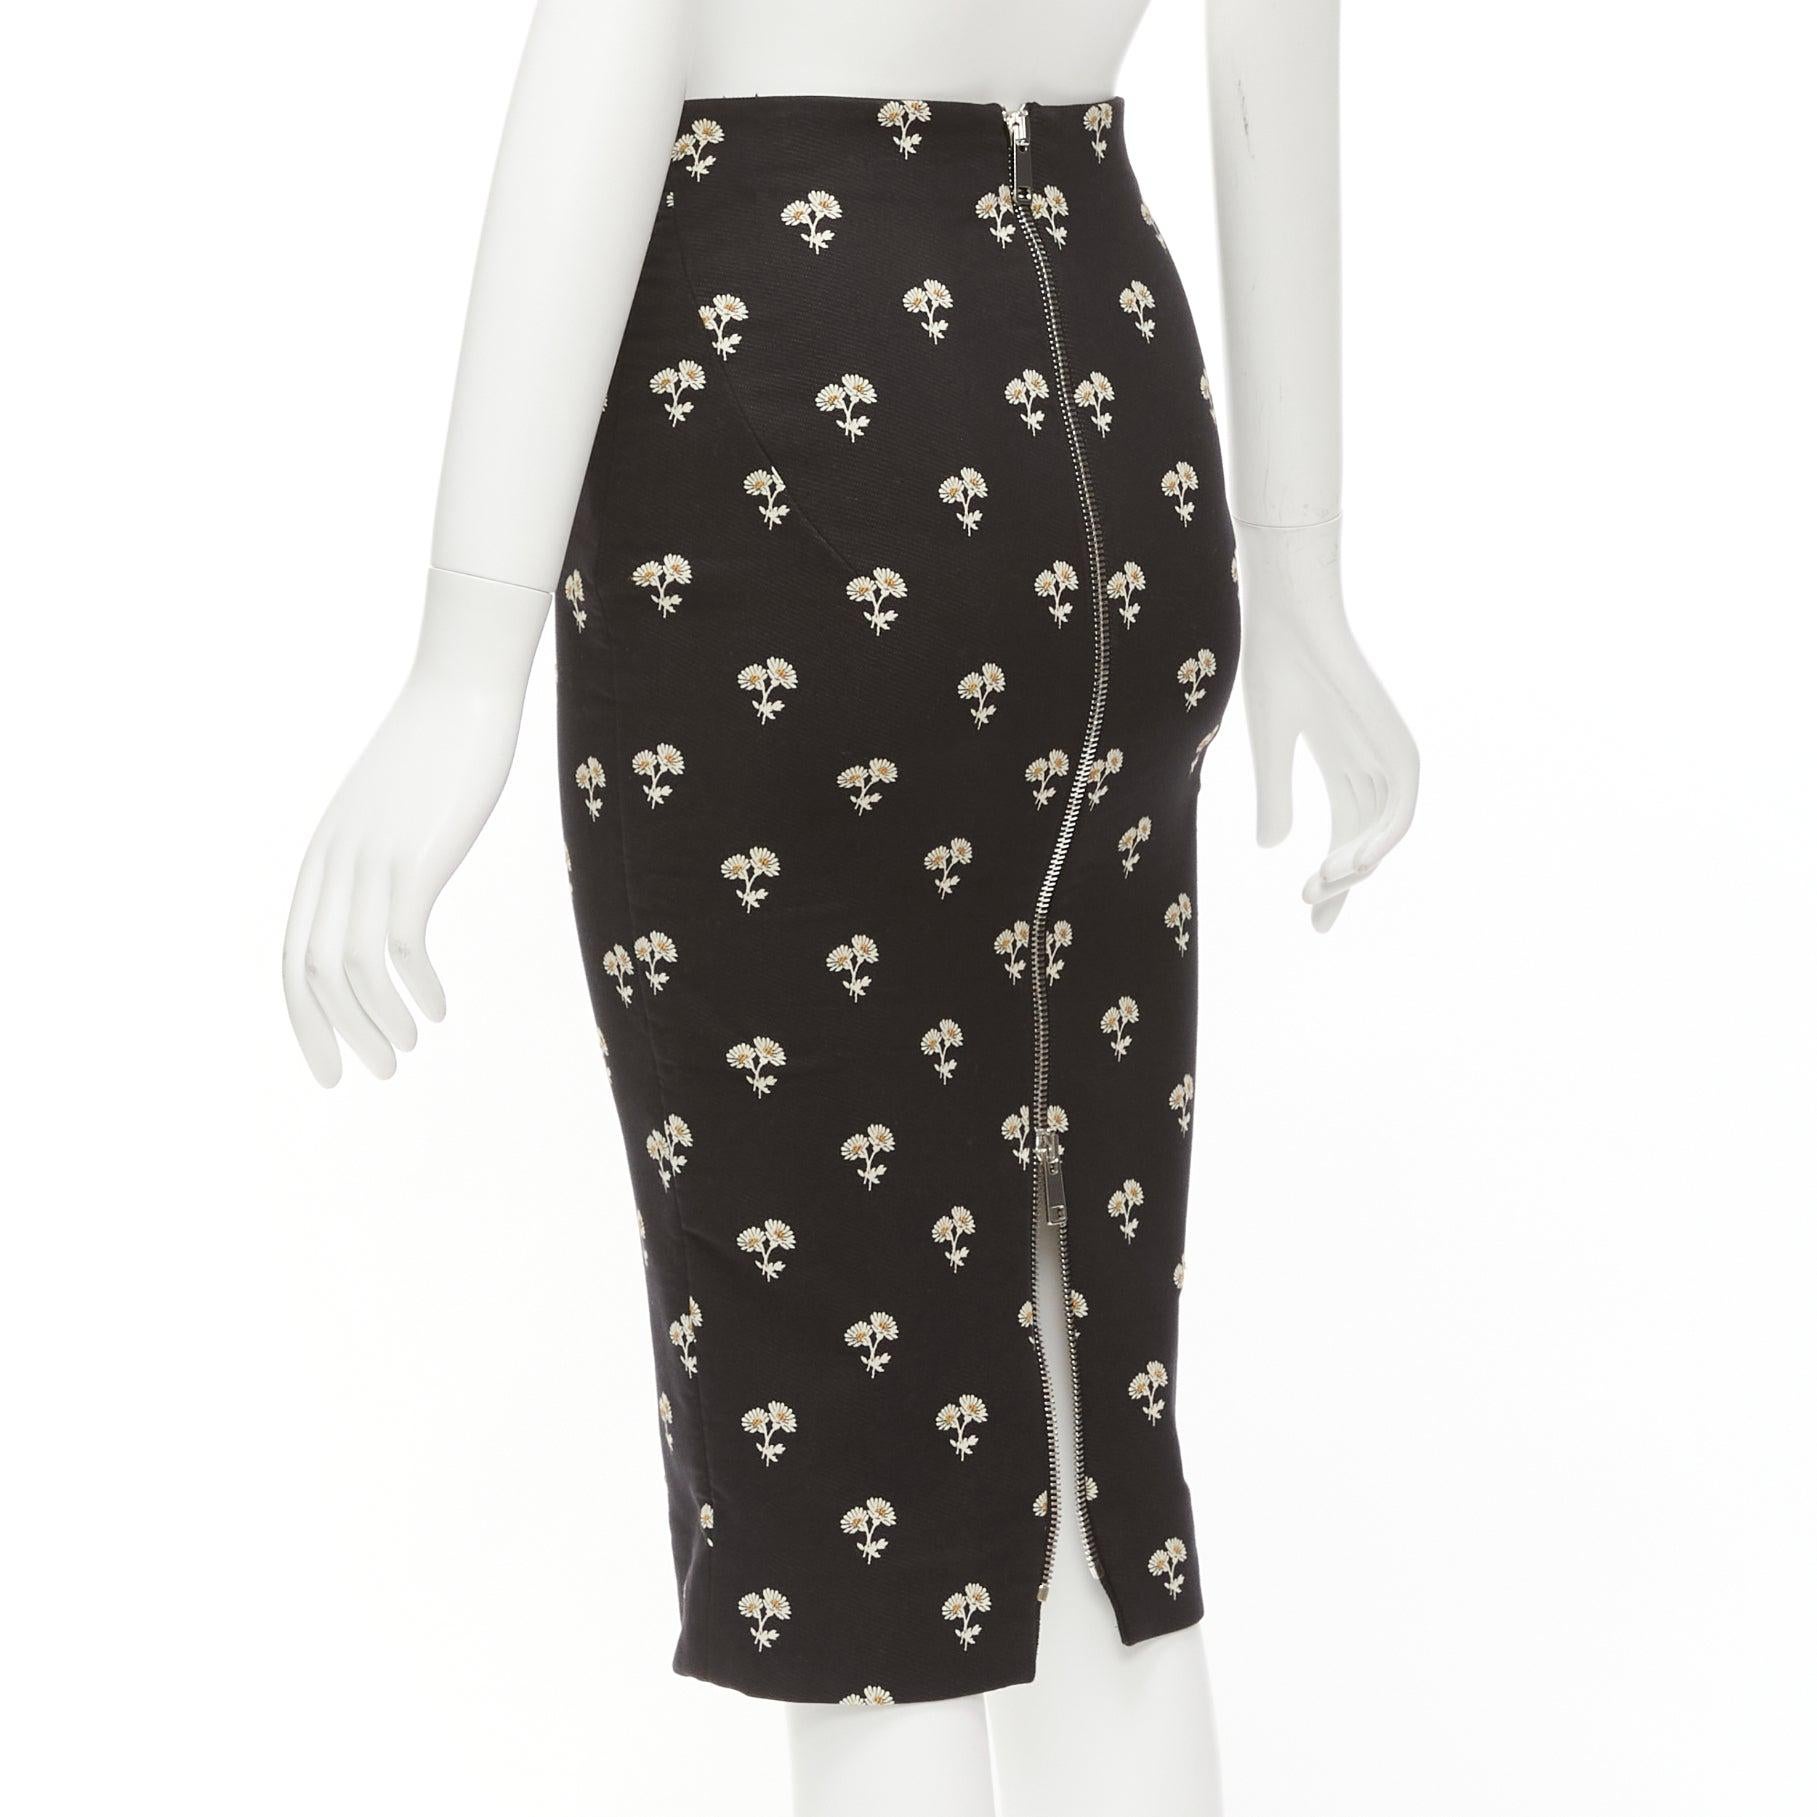 VICTORIA BECKHAM black daisy floral brocade twill two way zip pencil skirt UK8 S For Sale 2